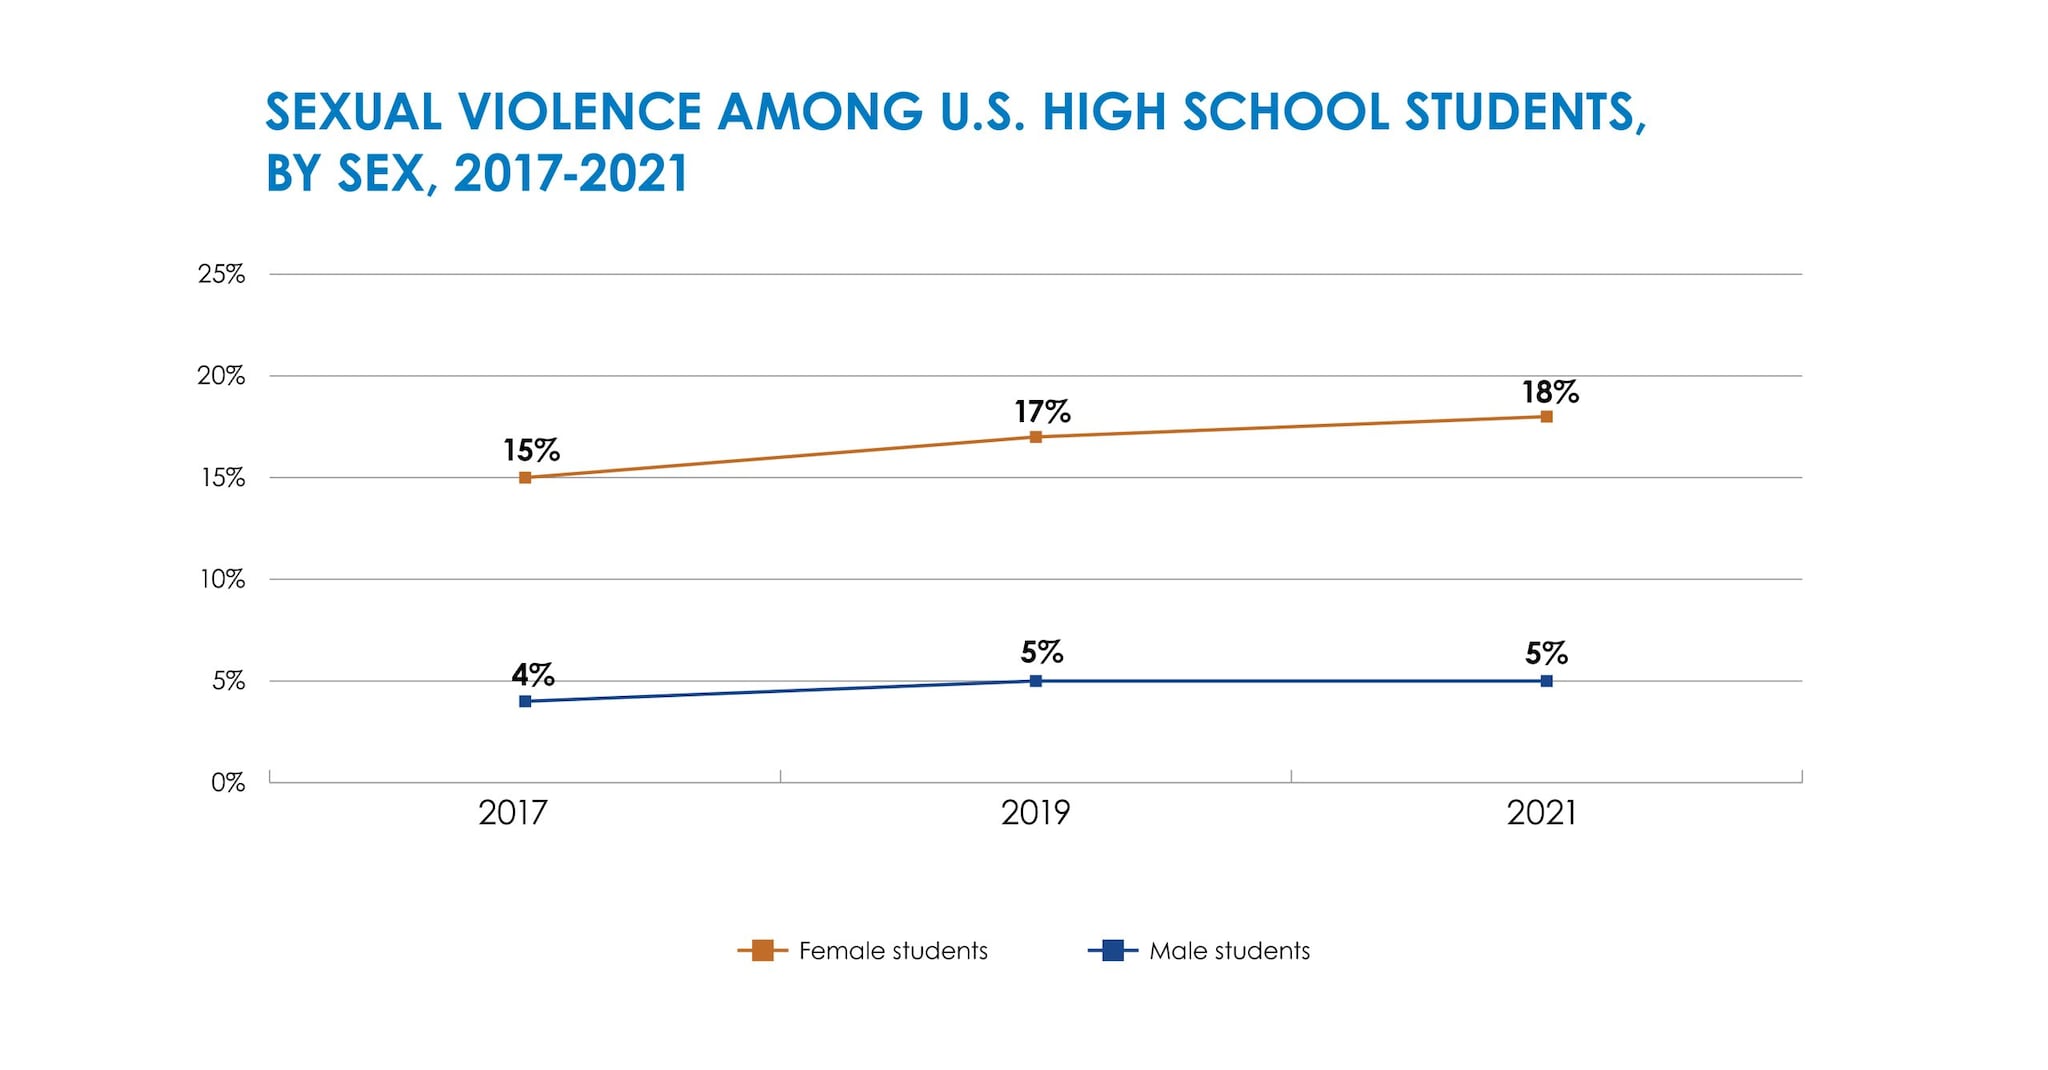 A double line graph showing 2017-2021 U.S. student data on sexual violence by sex, with girls reporting higher levels of sexual violence compared to boys